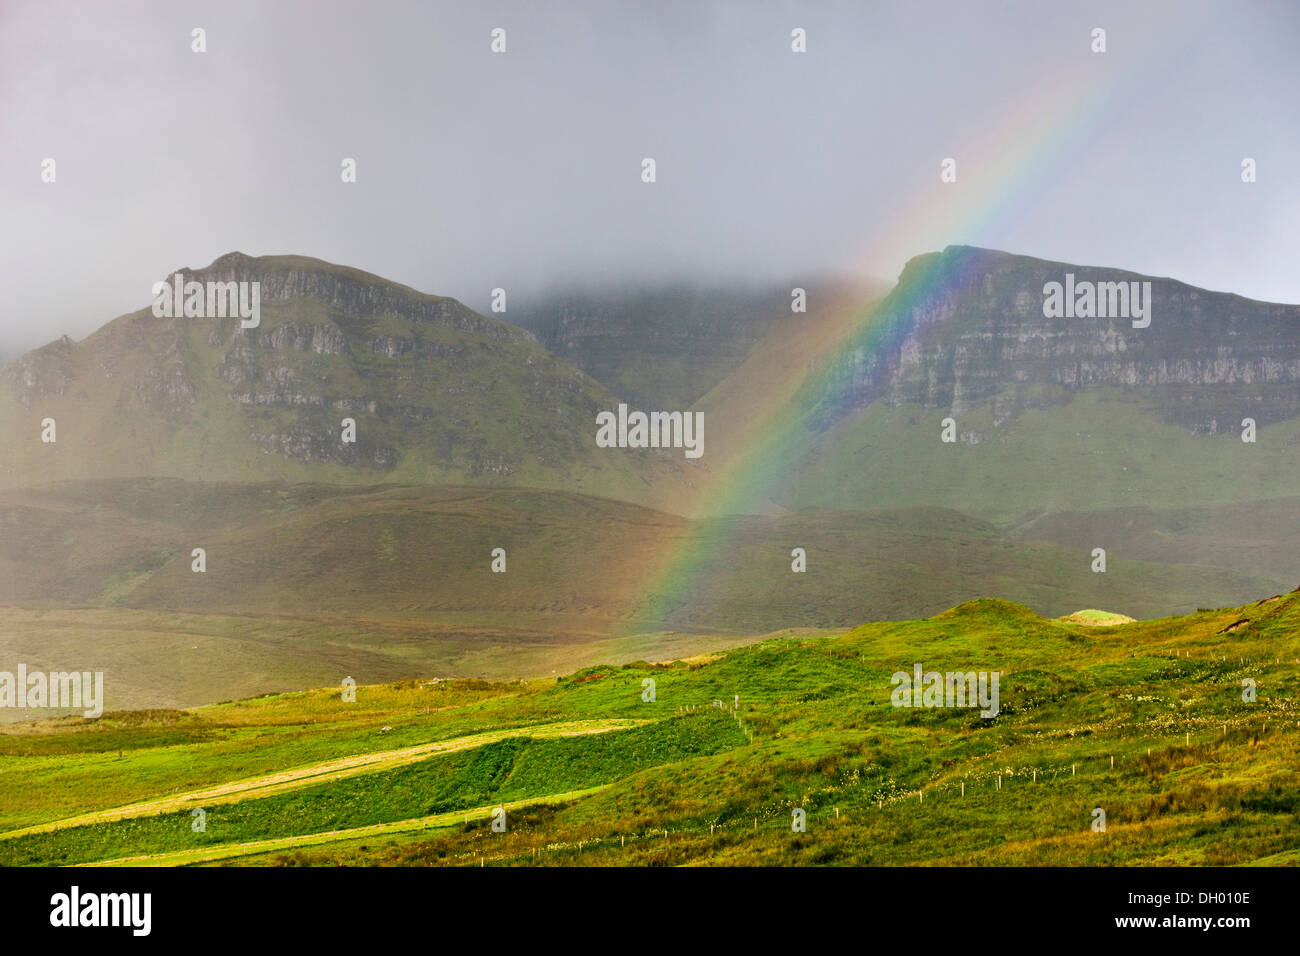 Rainbow in front of the mountains at Quiraing, Quiraing, Isle of Skye, Scotland, United Kingdom Stock Photo